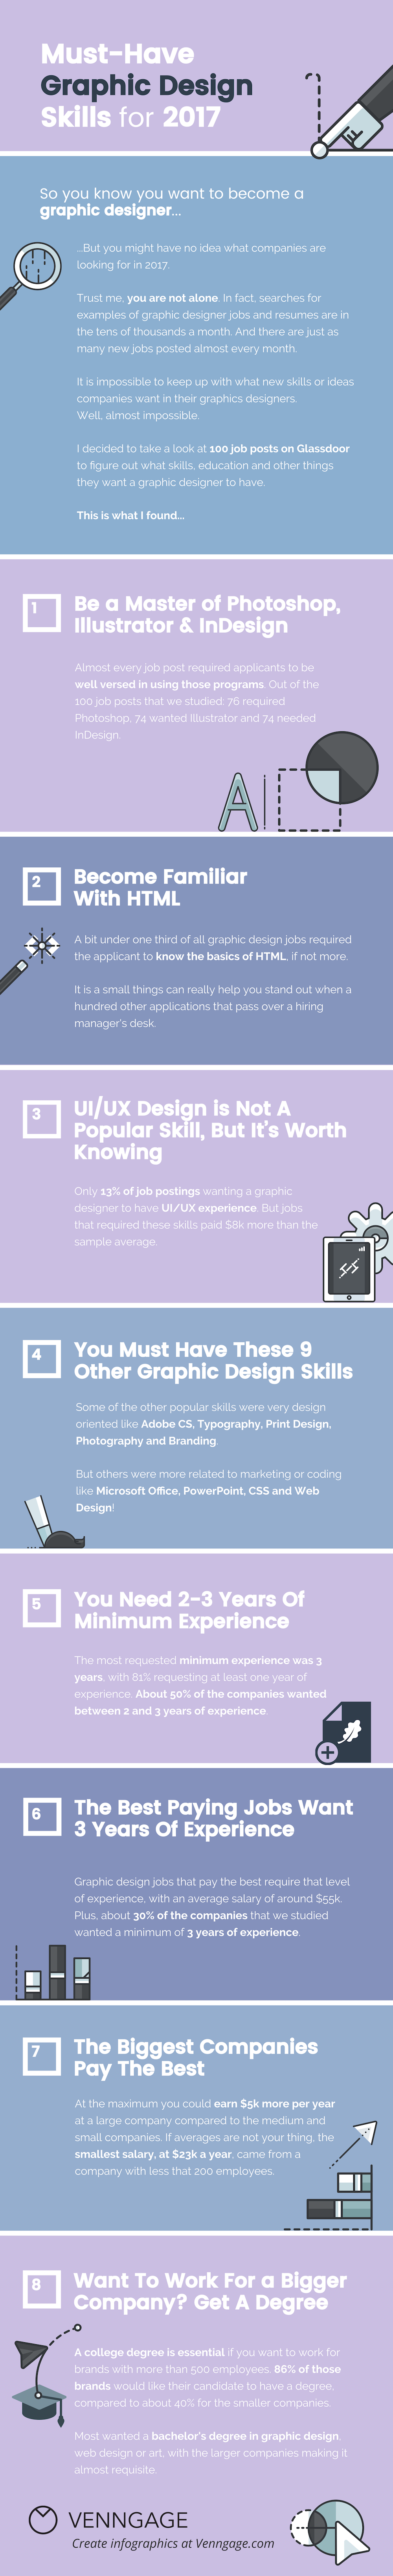 12 Graphic Design Skills You Need To Be Hired [Infographic.